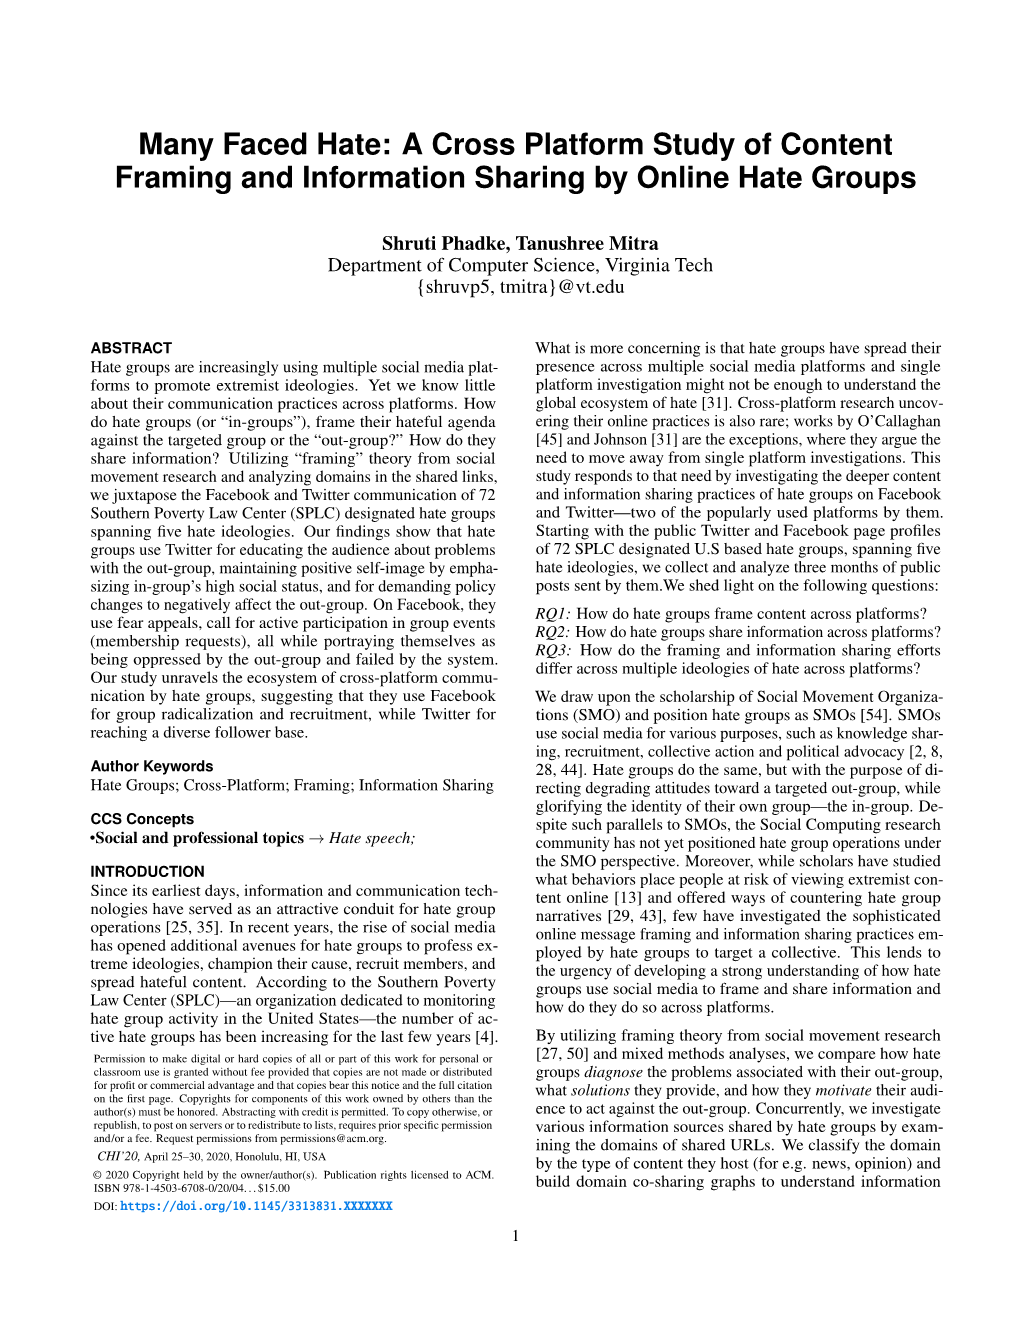 Many Faced Hate: a Cross Platform Study of Content Framing and Information Sharing by Online Hate Groups